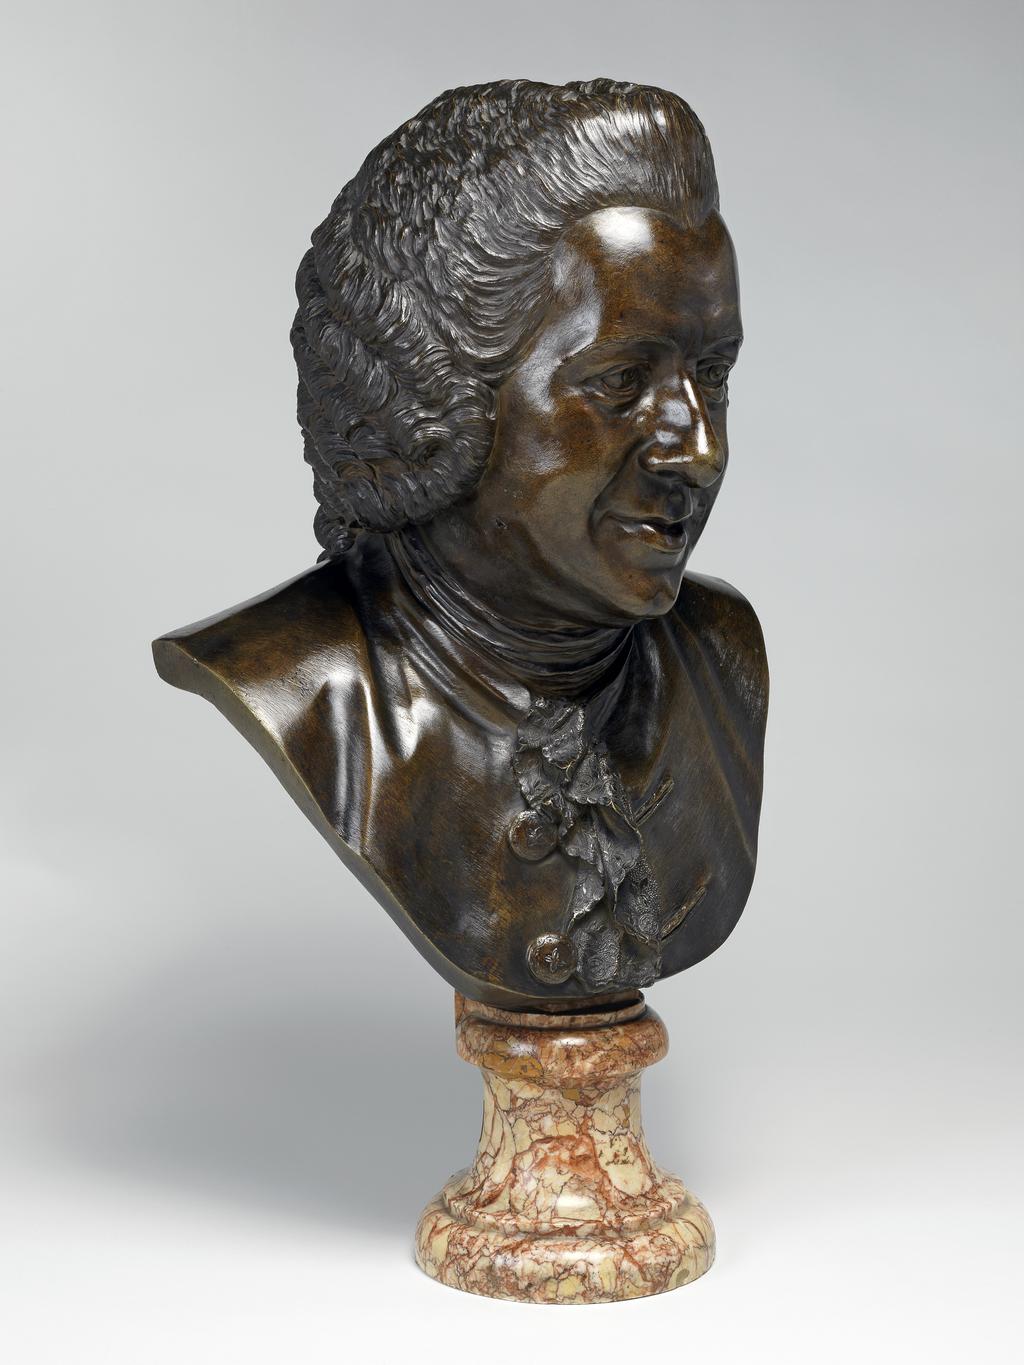 An image of Sculpture/Bust. Portrait bust of Pierre-Louis-Marie Maloët. Pigalle, Jean-Baptiste (French, 1714-1785). Bronze, cast and chased, original marble socle, height, whole, 62.0 cm, height, bust, 45.7 cm, width, bust, 34.0 cm, circa 1775-1785. Louis XVI.